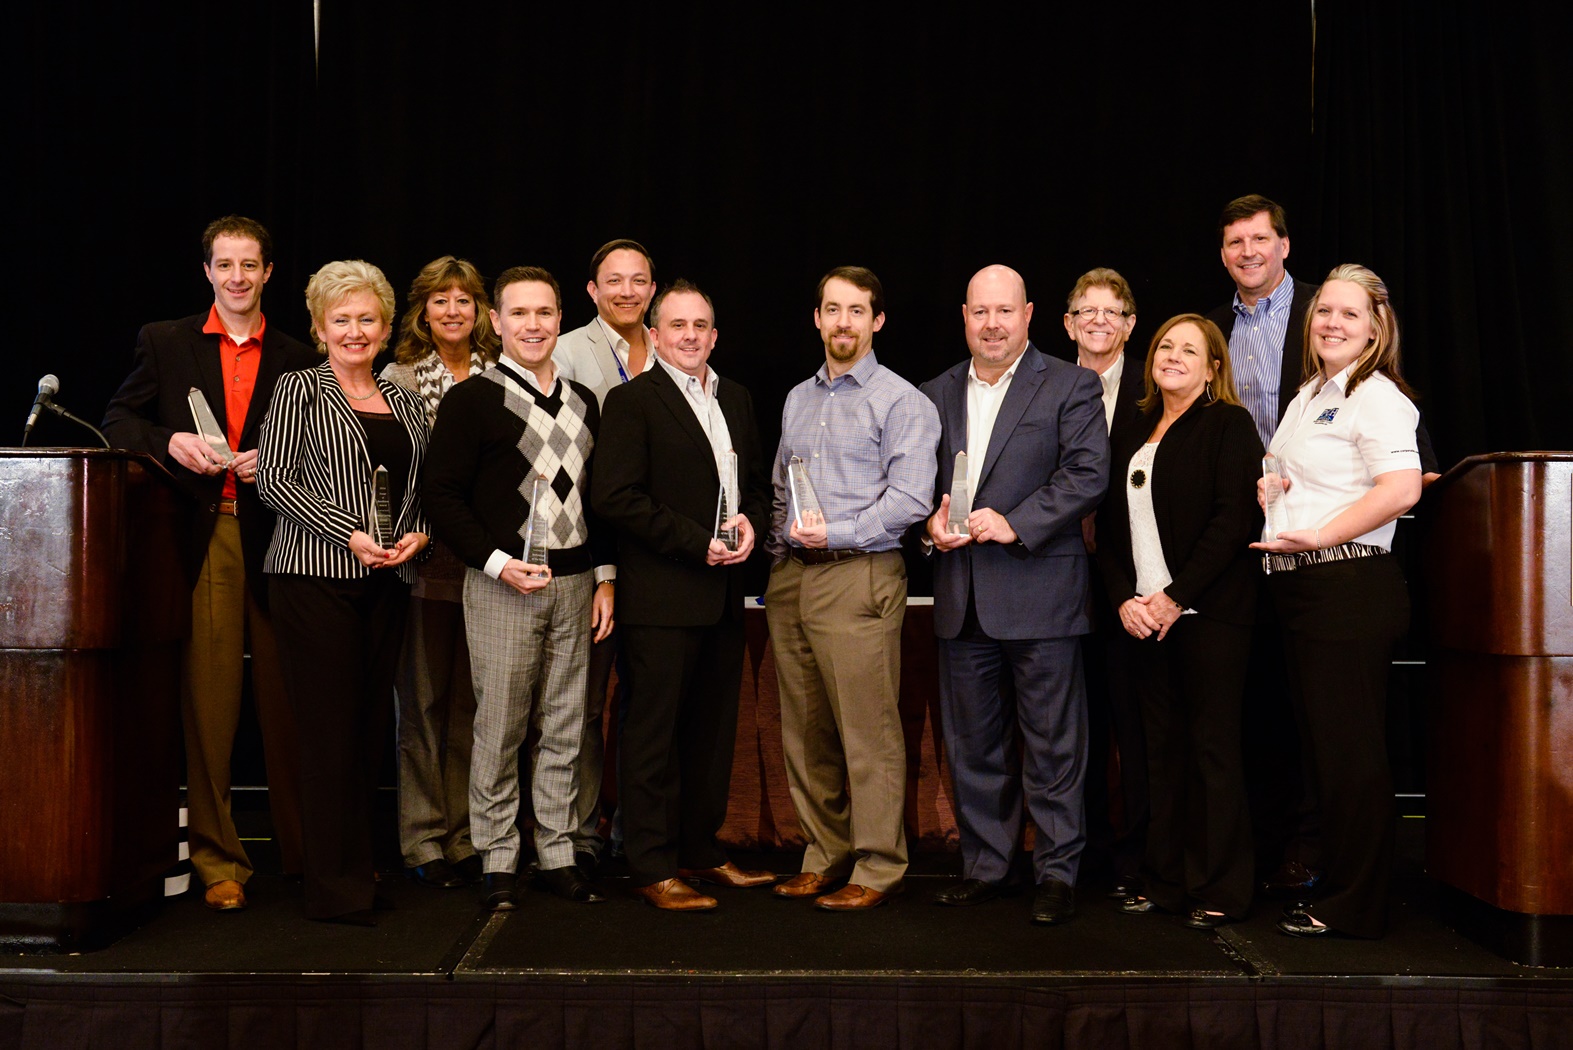 CHPA Tower of Excellence Award winners